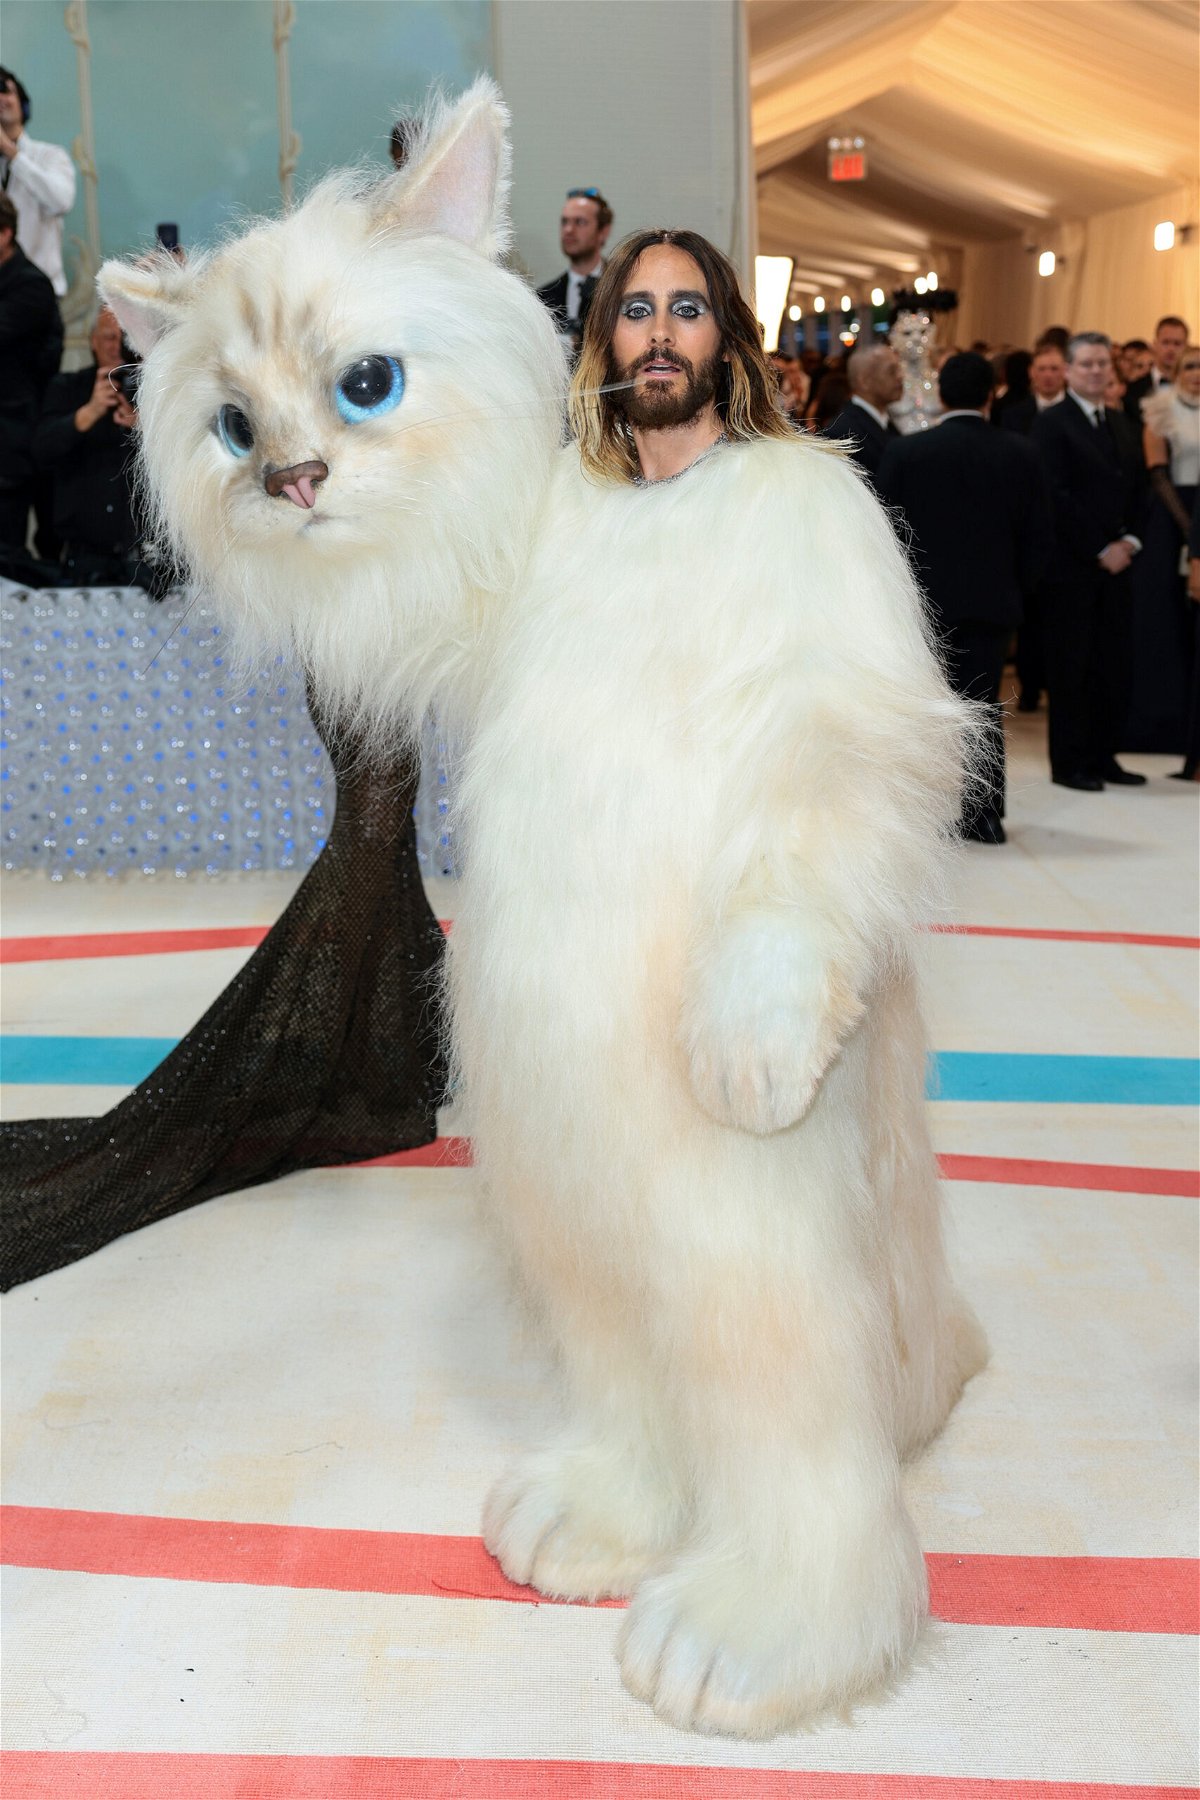 Doja Cat and Jared Leto dressed up like Karl Lagerfeld's cat for the